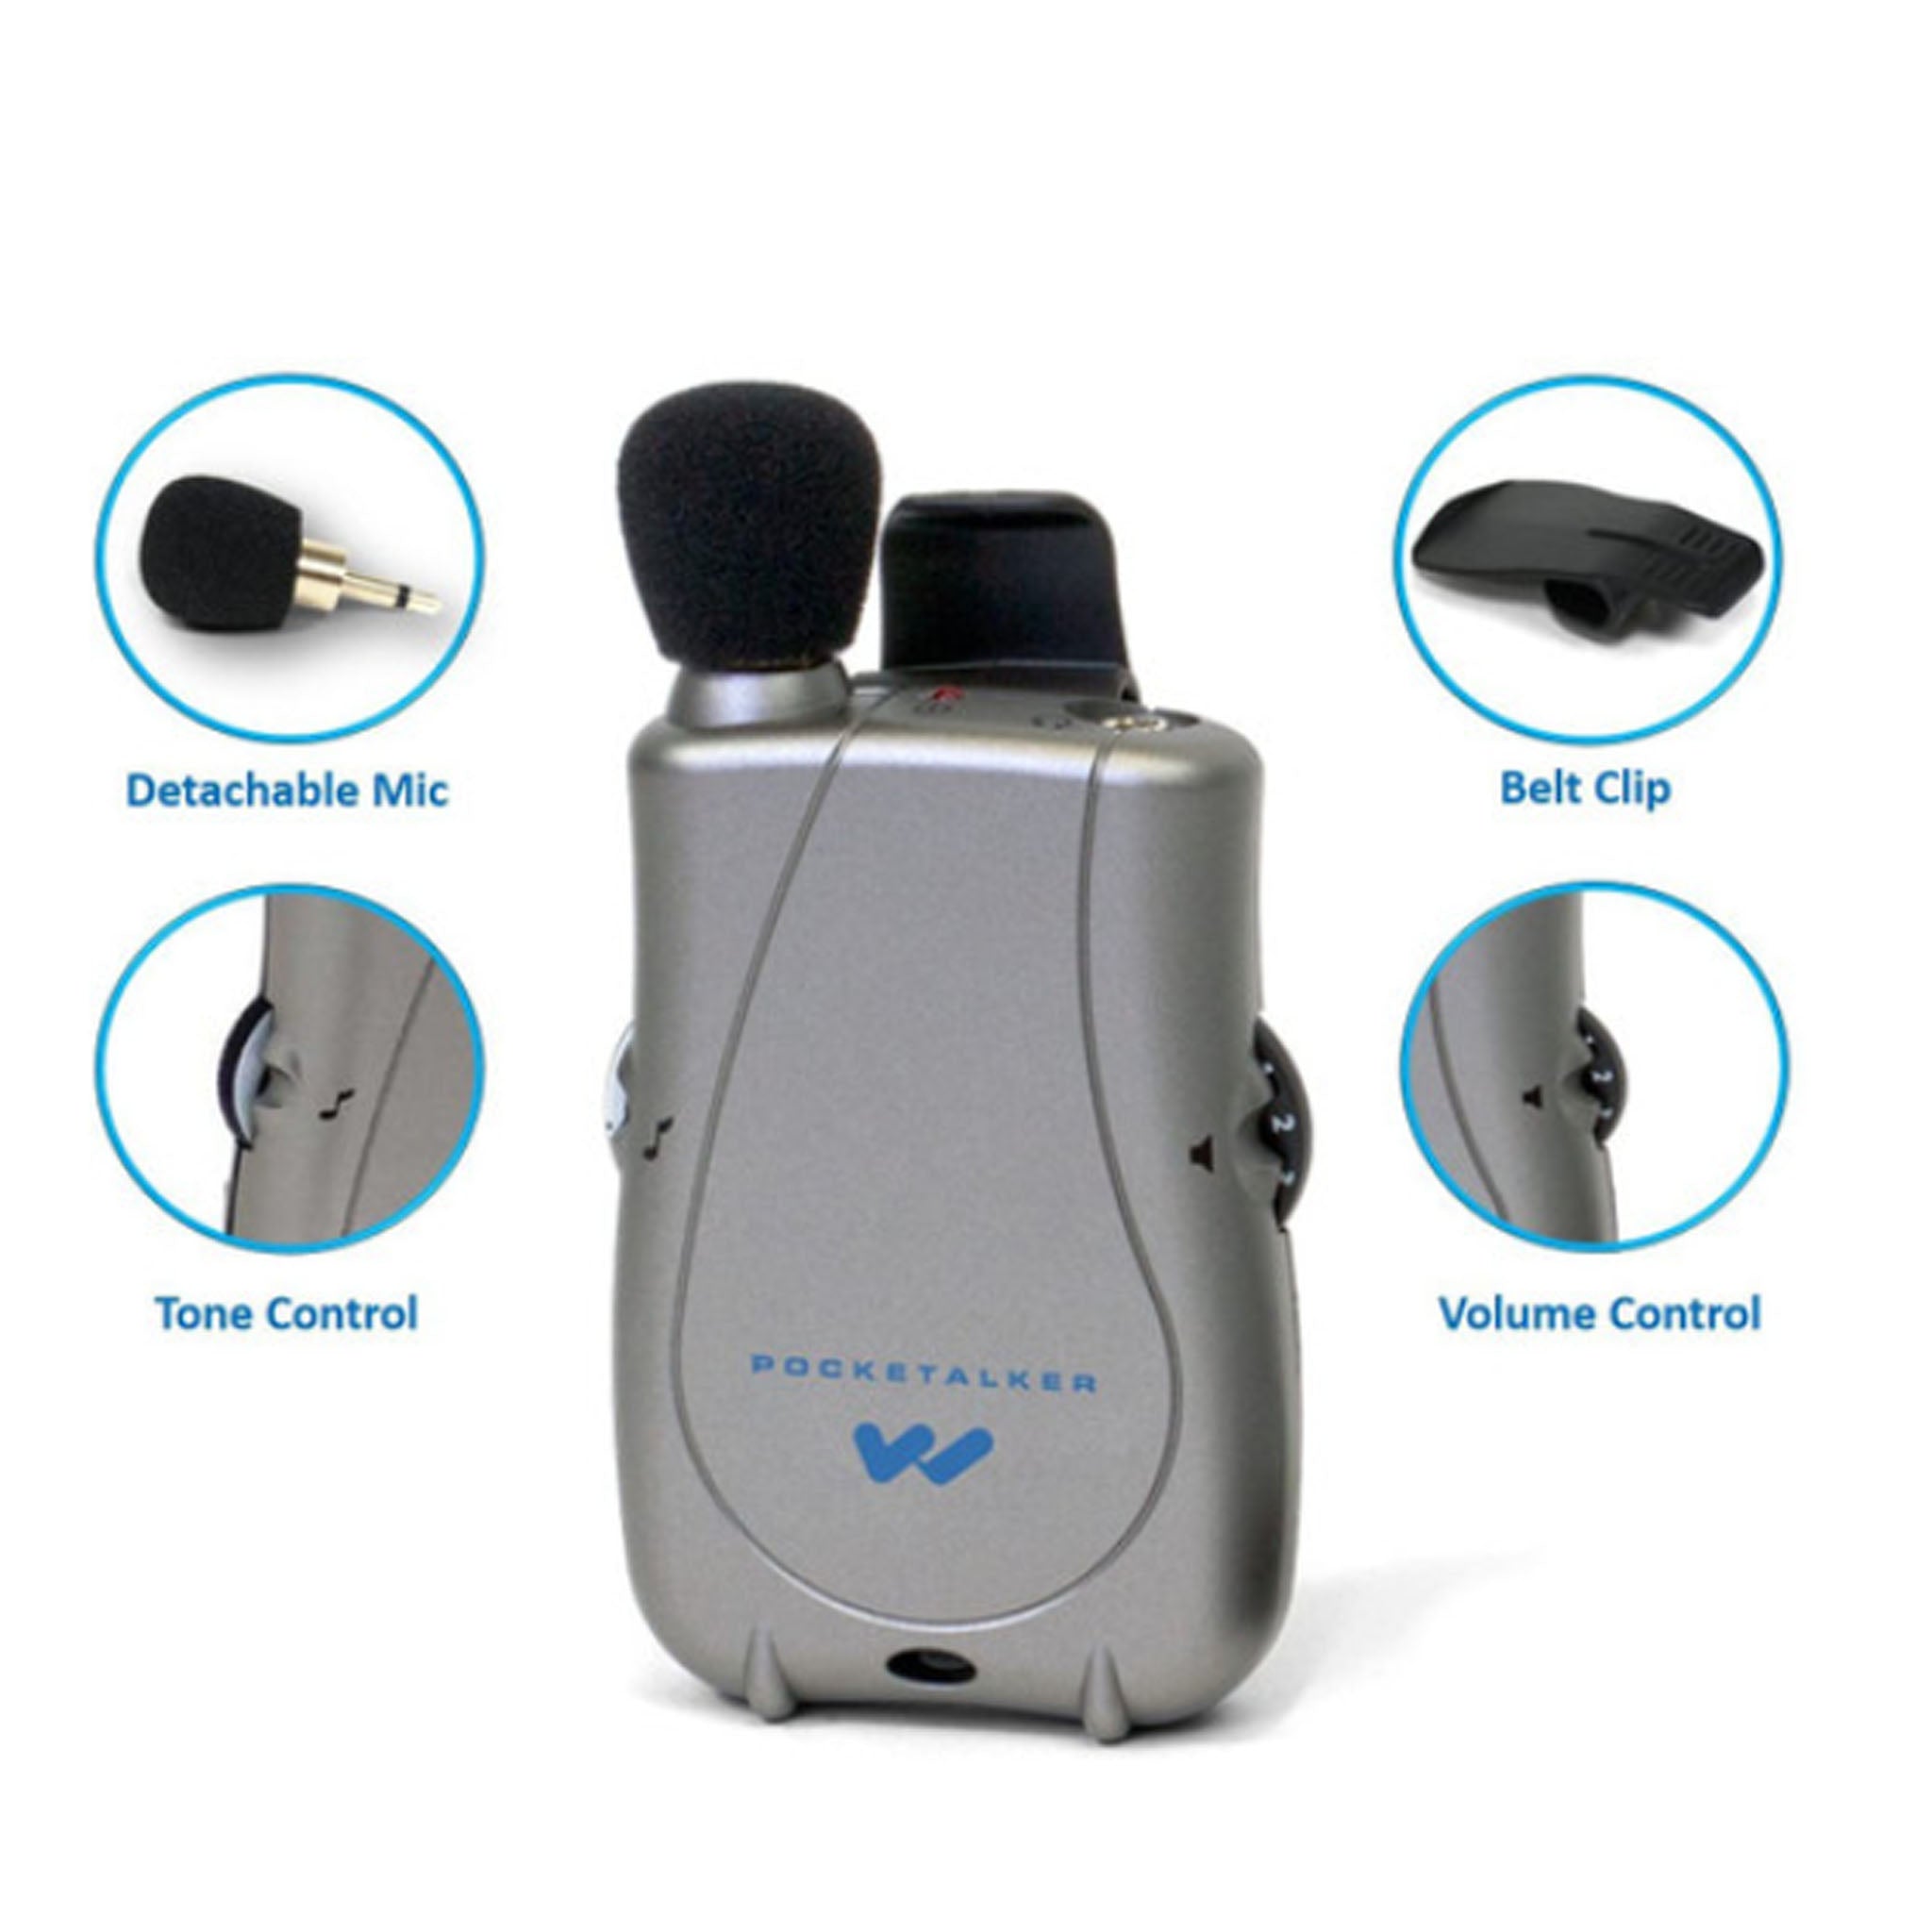 Williams Sound Pocketalker Ultra Personal Sound Amplifier Duo Pack System